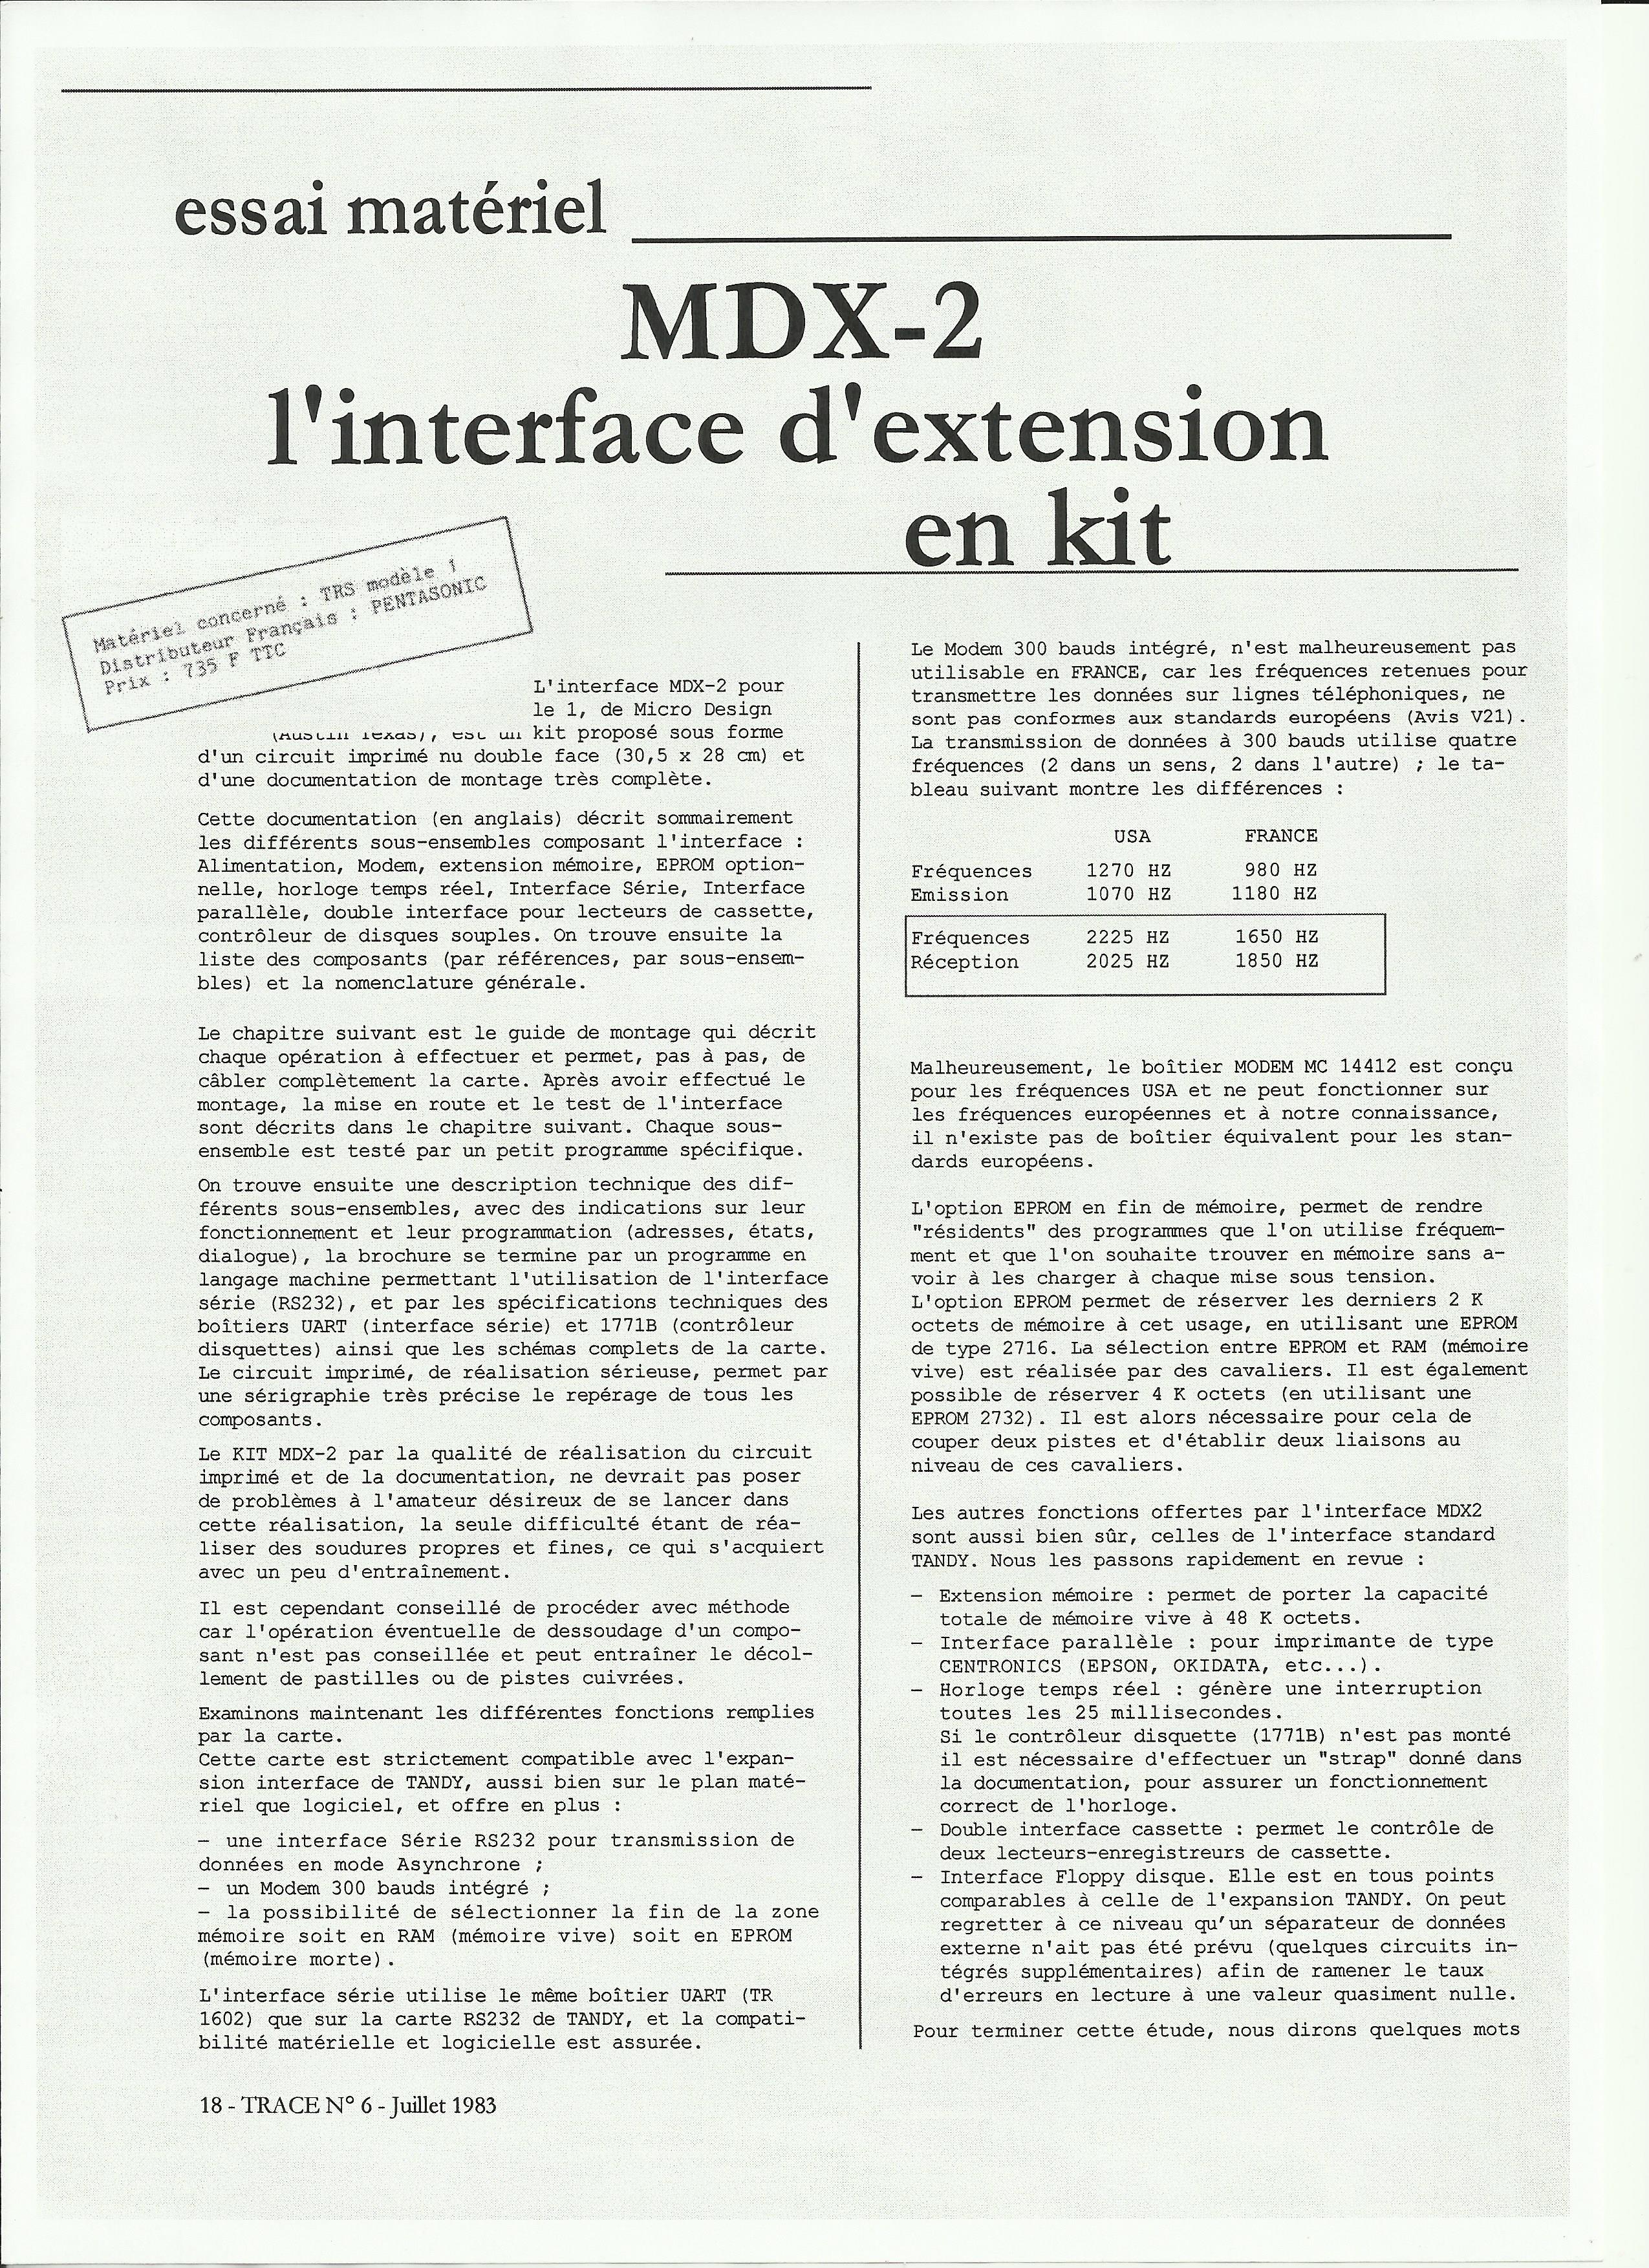 Article MDX 20003